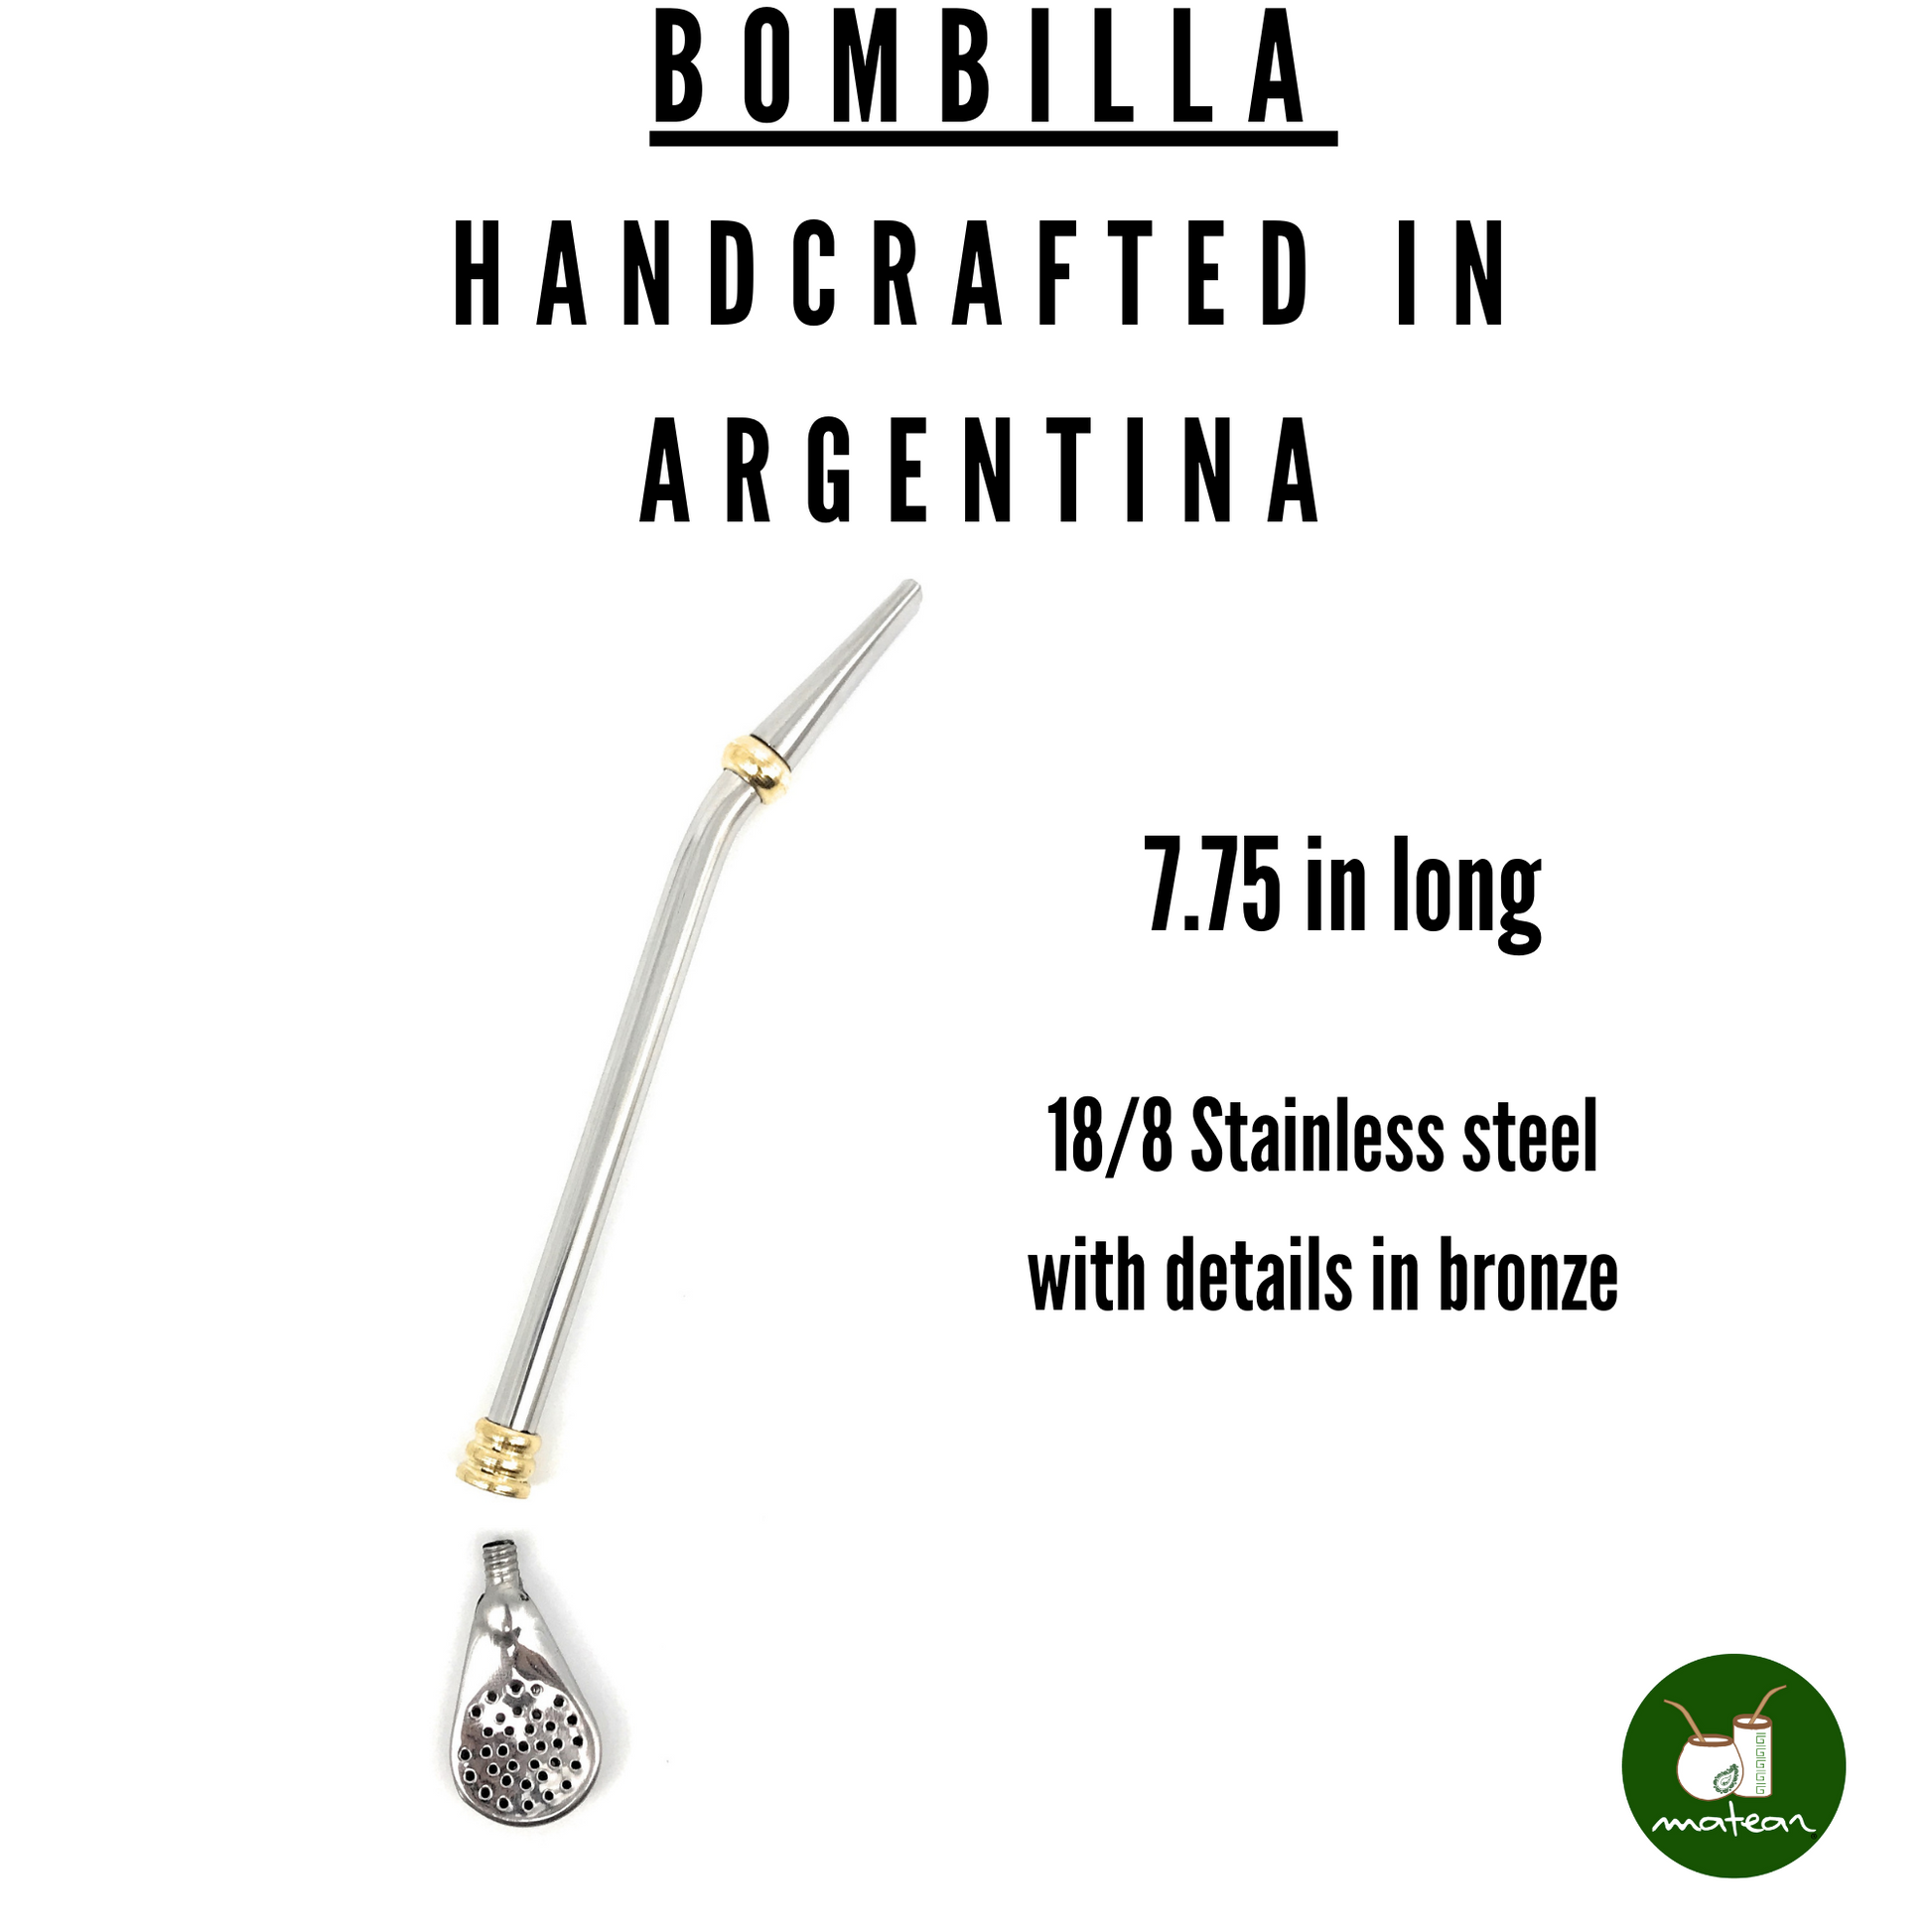 PREMIUM Handcrafted bombilla | Made in Argentina for yerba mate drinking |  18/8 stainless steel & bronze large mate straw | Removable spoon style